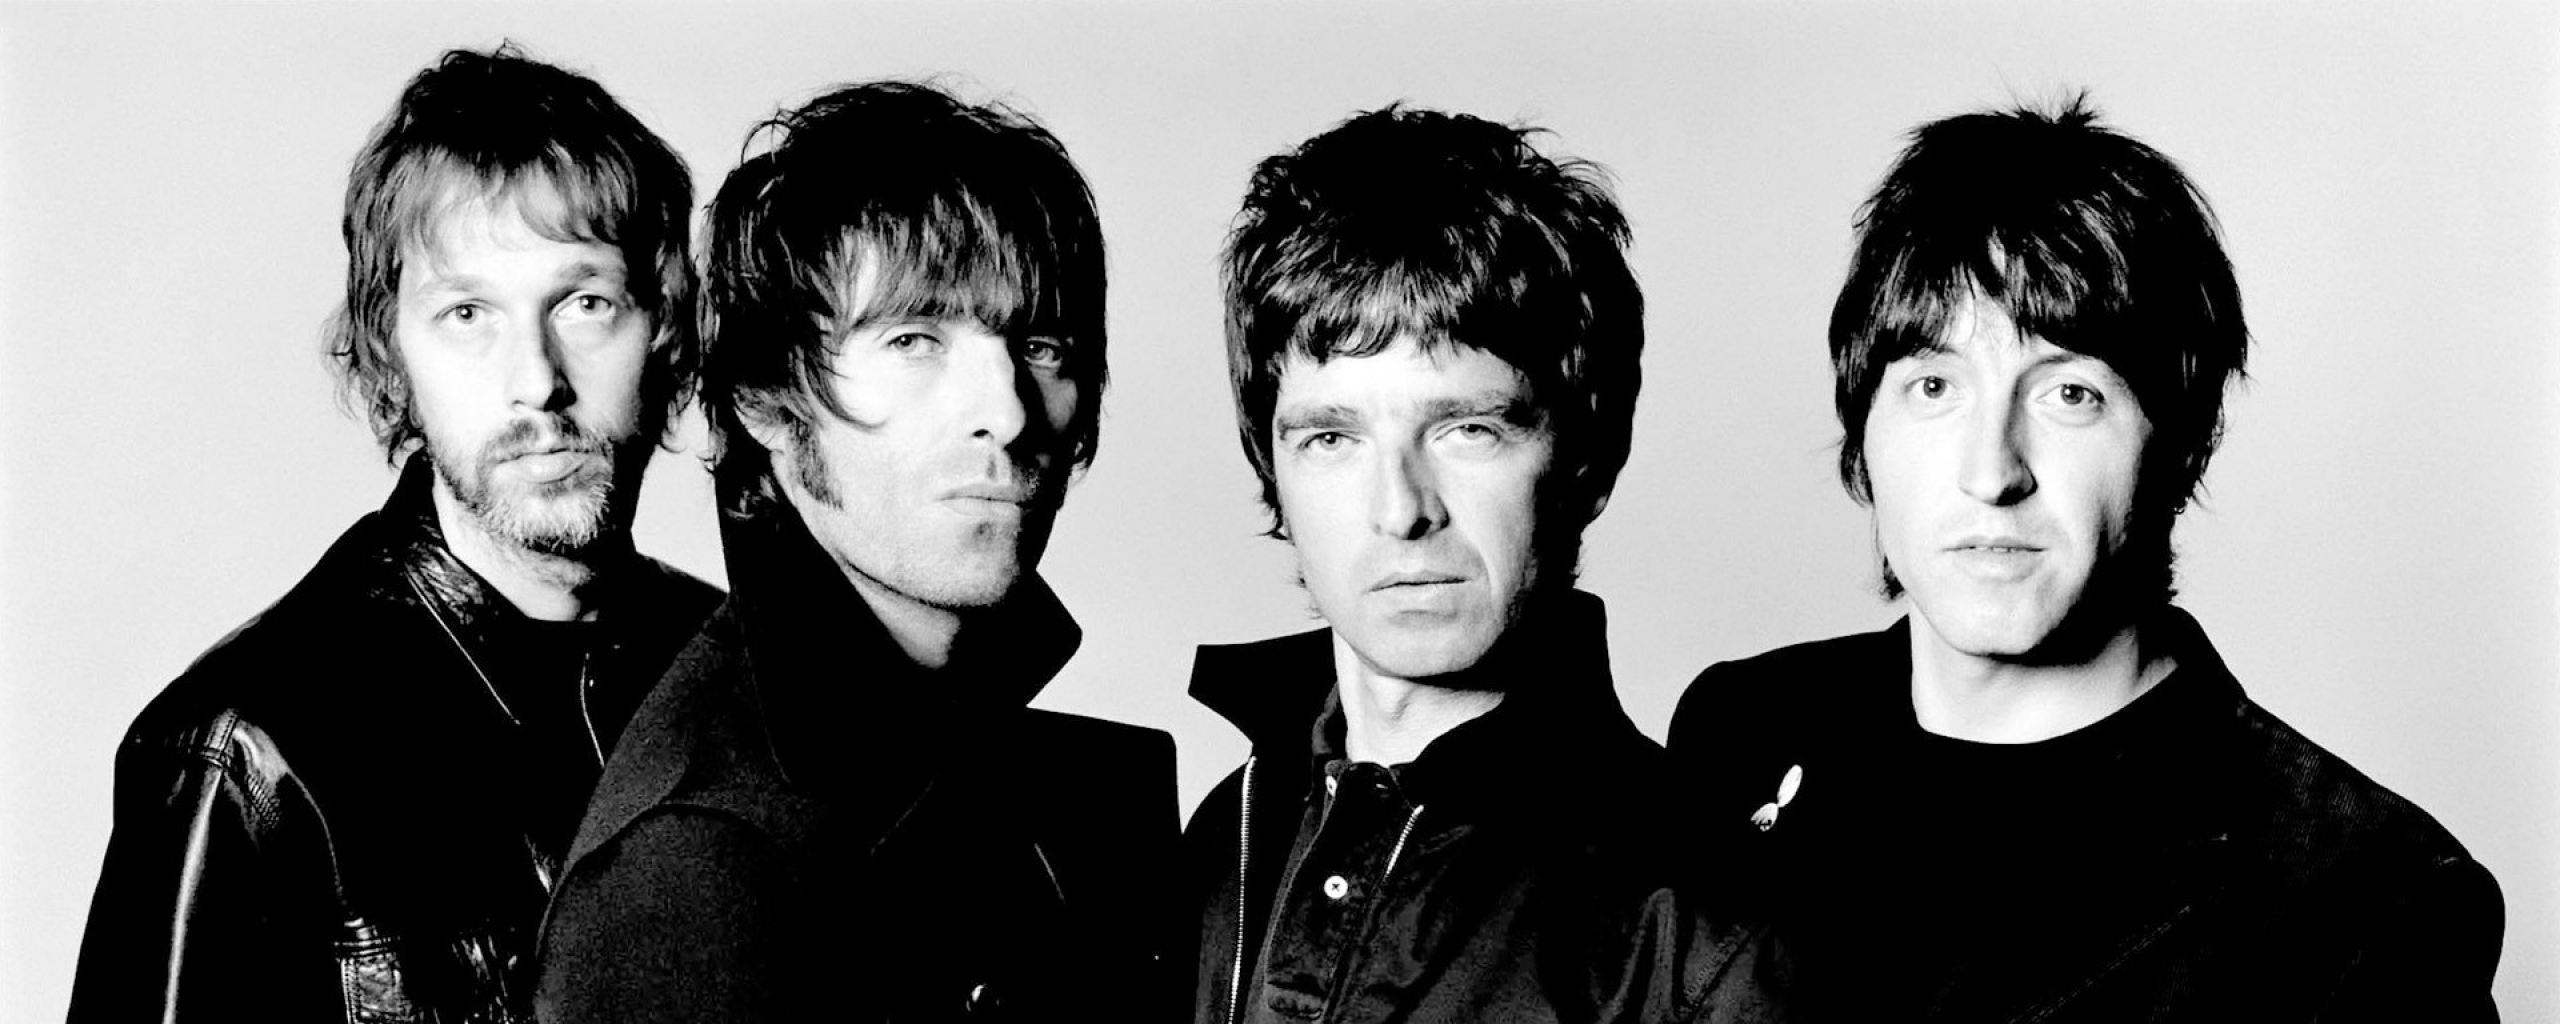 Oasis Share Demo For 'Going Nowhere' | Music News – Conversations ...